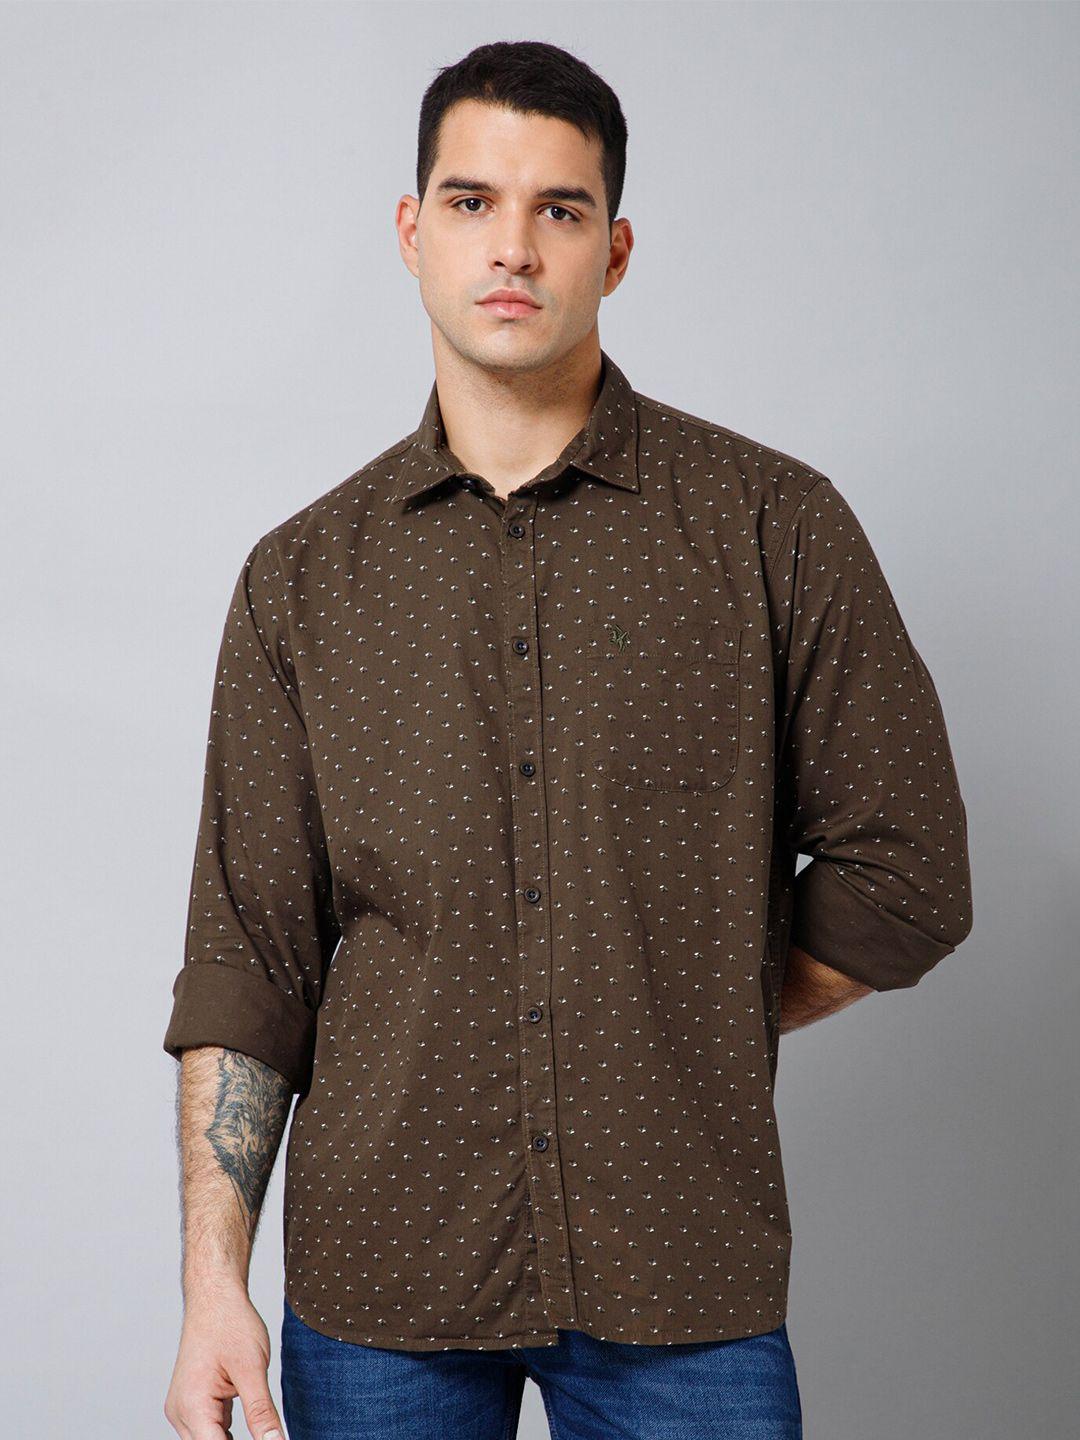 cantabil floral printed comfort cotton casual shirt